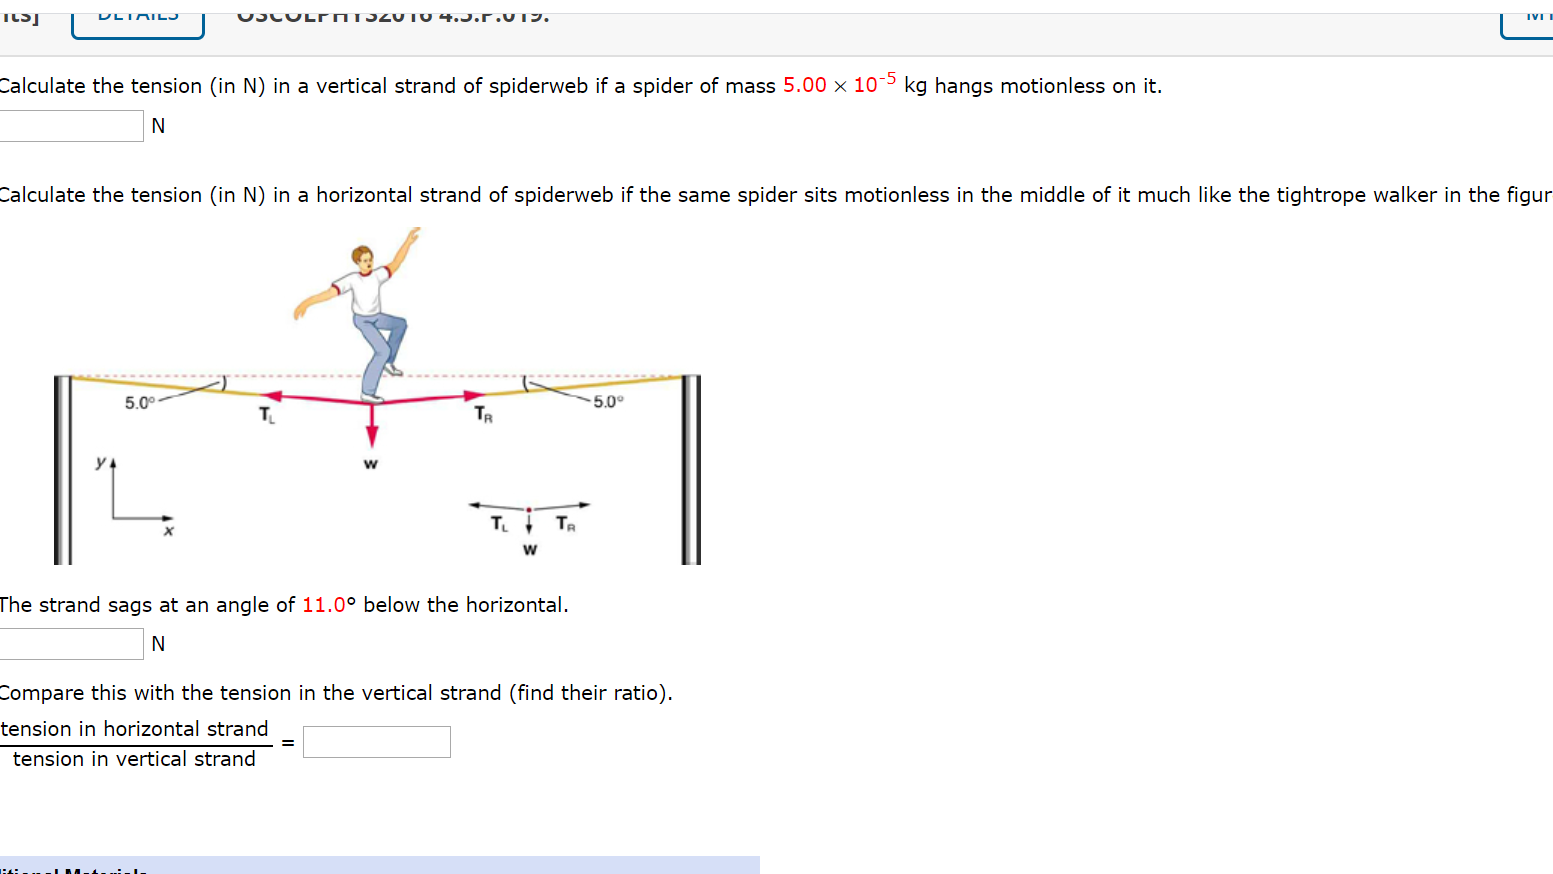 Calculate the tension (in N) in a vertical strand of spiderweb if a spider of mass 5.00 x 10¯5 kg hangs motionless on it.
Calculate the tension (in N) in a horizontal strand of spiderweb if the same spider sits motionless in the middle of it much like the tightrope walker
5.0°
5.00
T.
TR
y 4
T.I TR
The strand sags at an angle of 11.0° below the horizontal.
Compare this with the tension in the vertical strand (find their ratio).
tension in horizontal strand
tension in vertical strand
